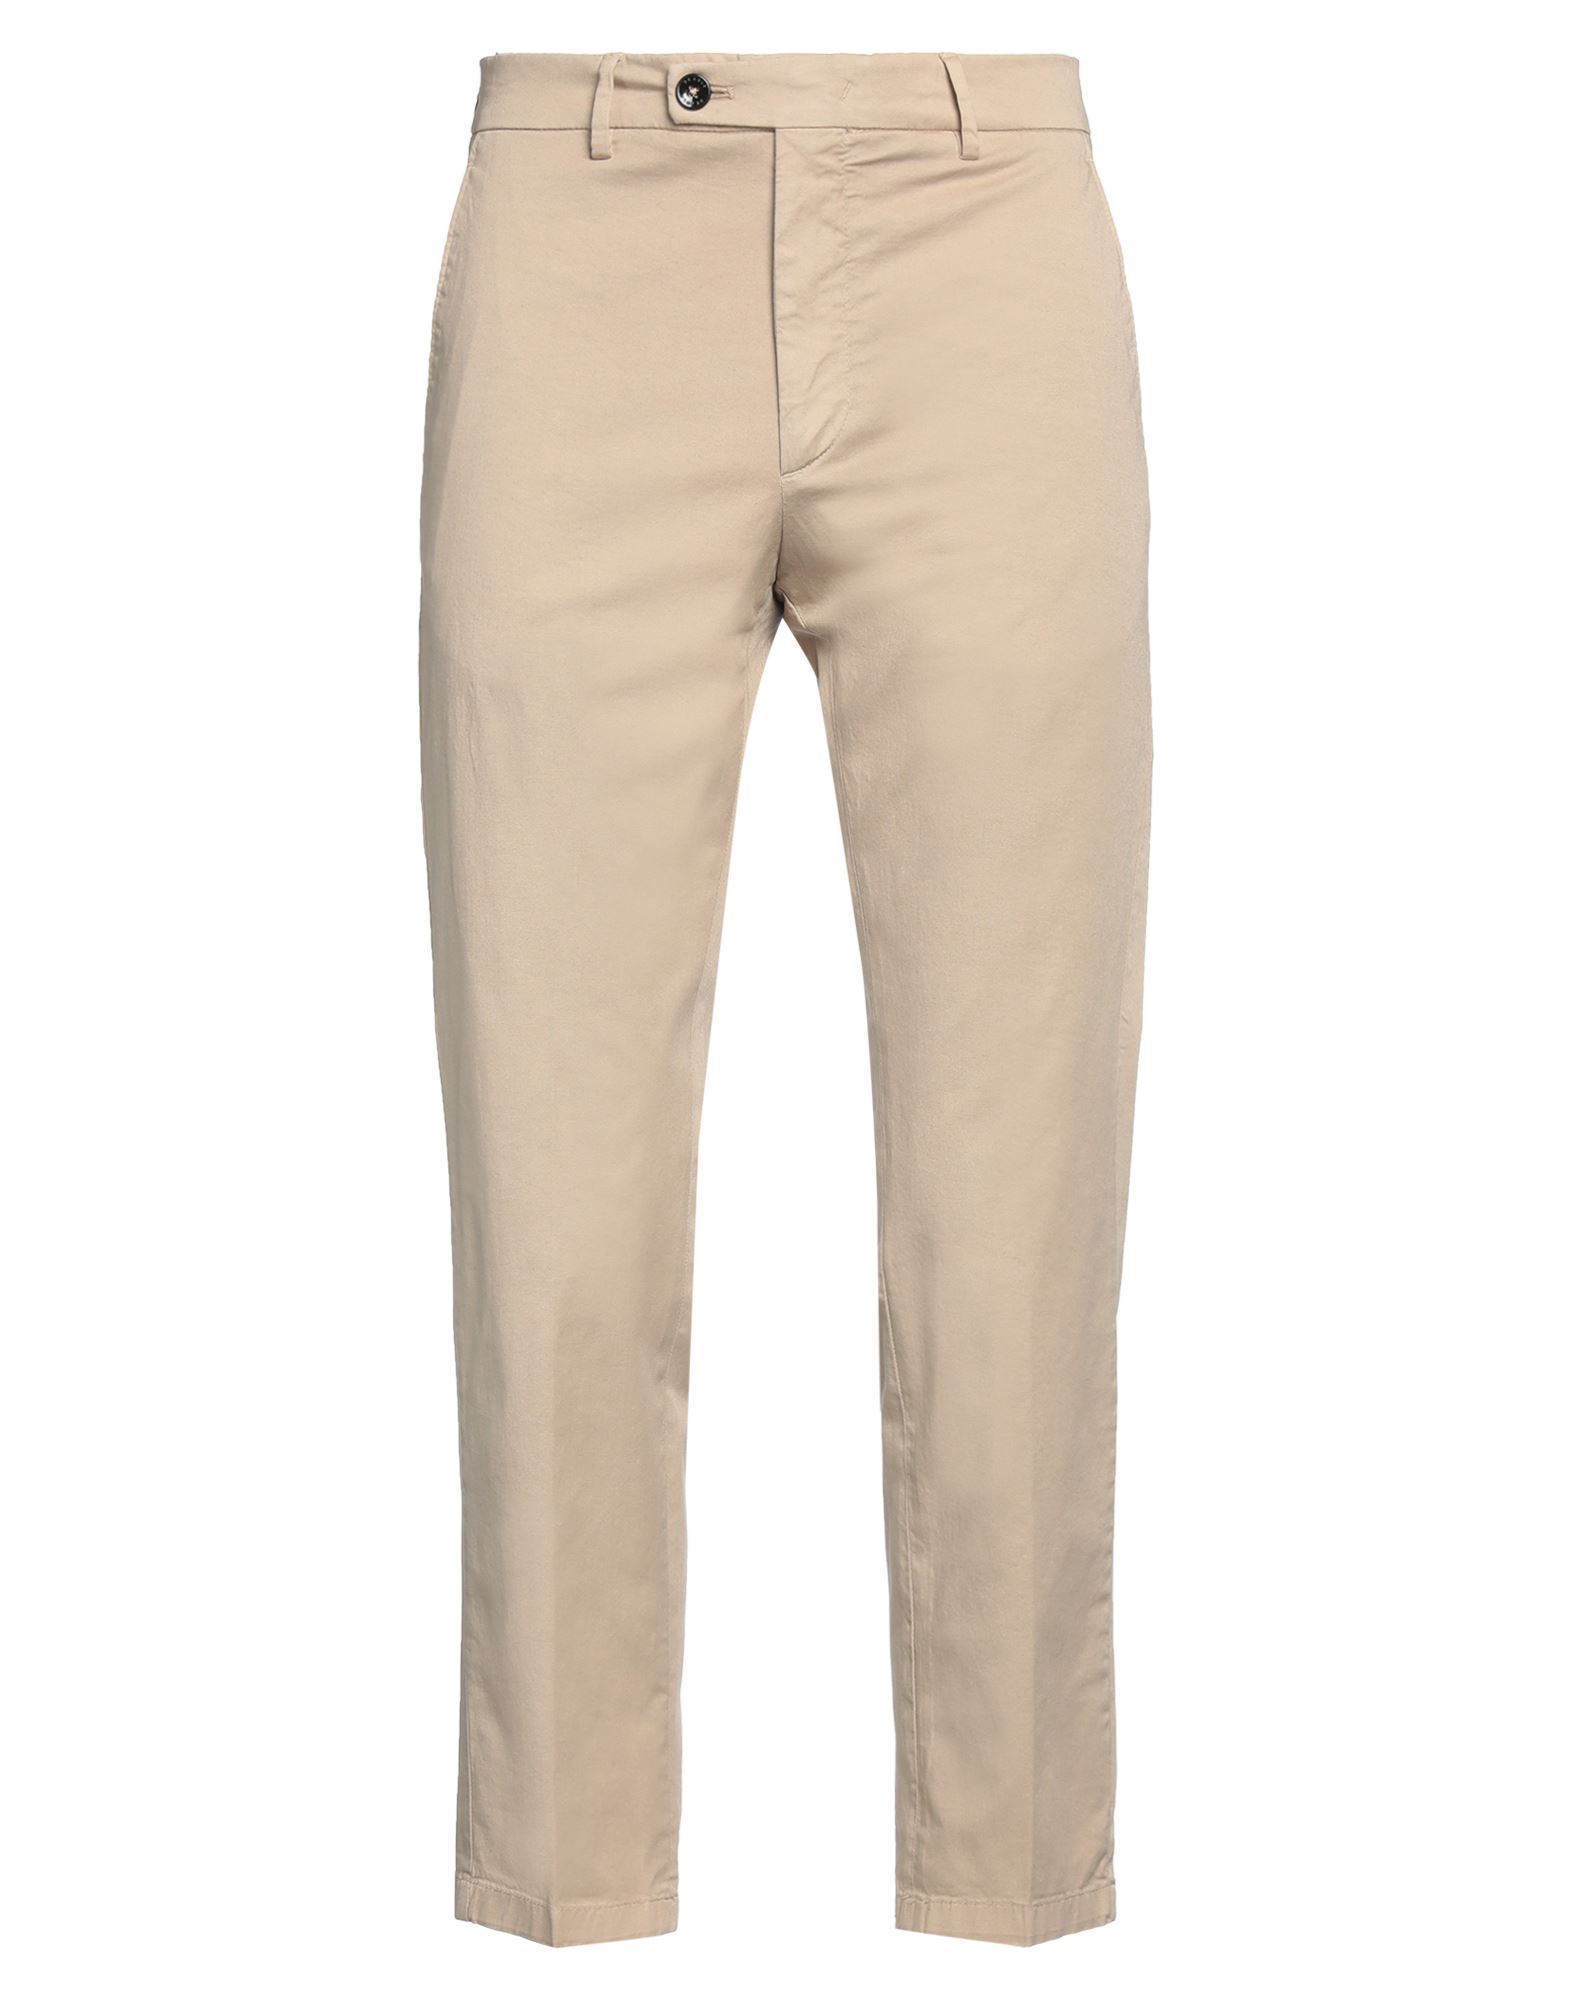 BE ABLE Hose Herren Beige von BE ABLE